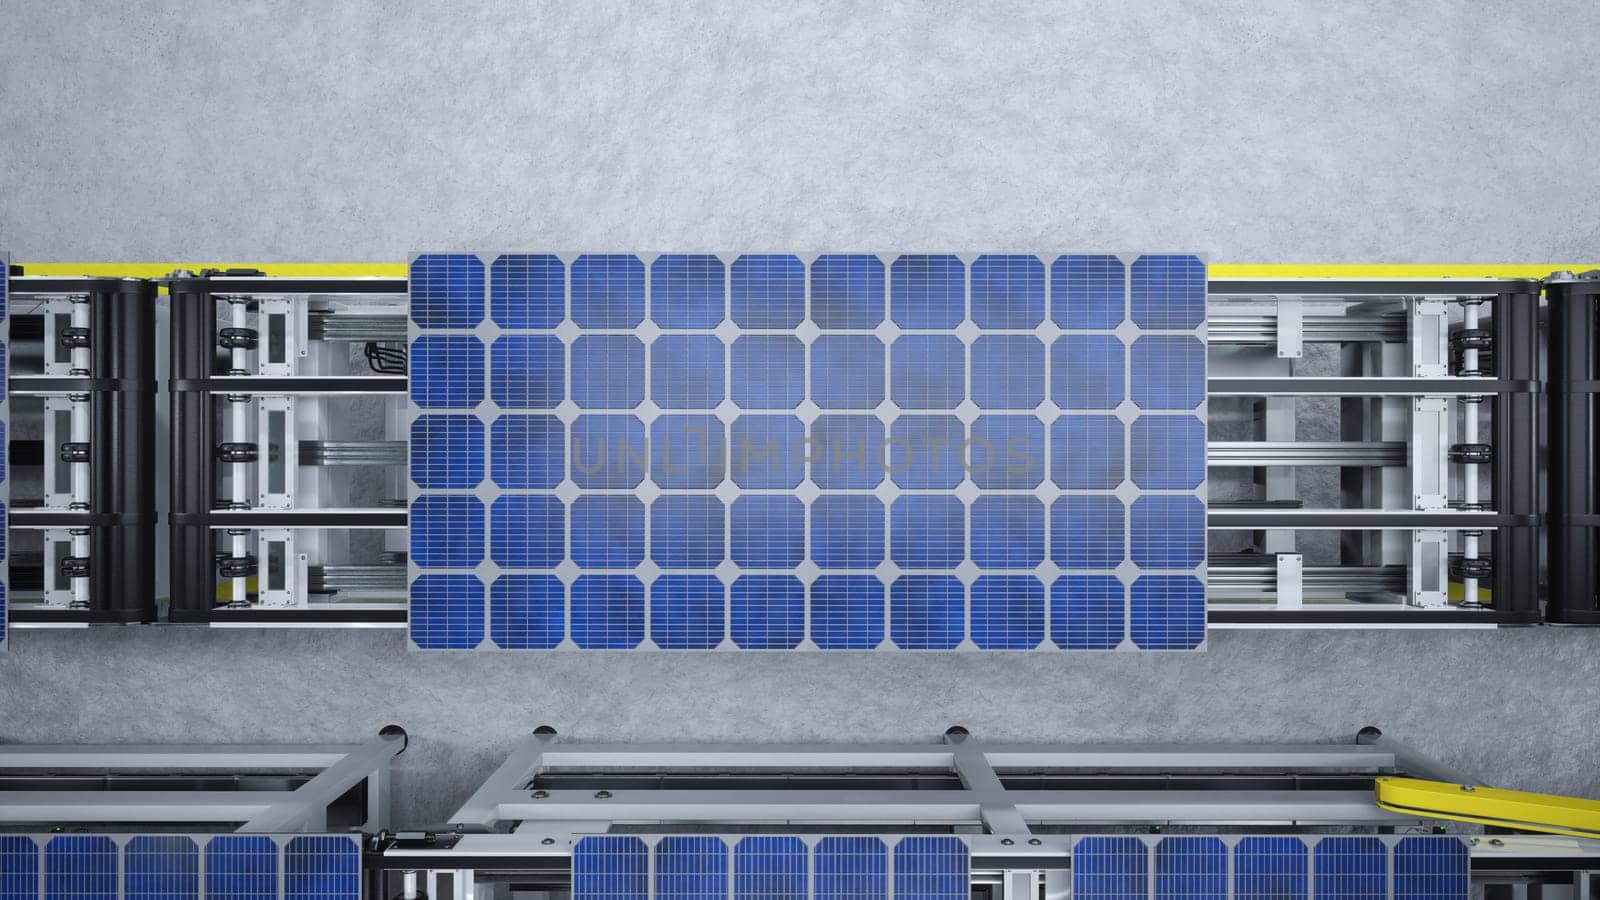 Top down view of solar panels on assembly line operated by high tech robot arms in modern sustainable factory. Aerial shot of photovoltaics produced in modern automated facility